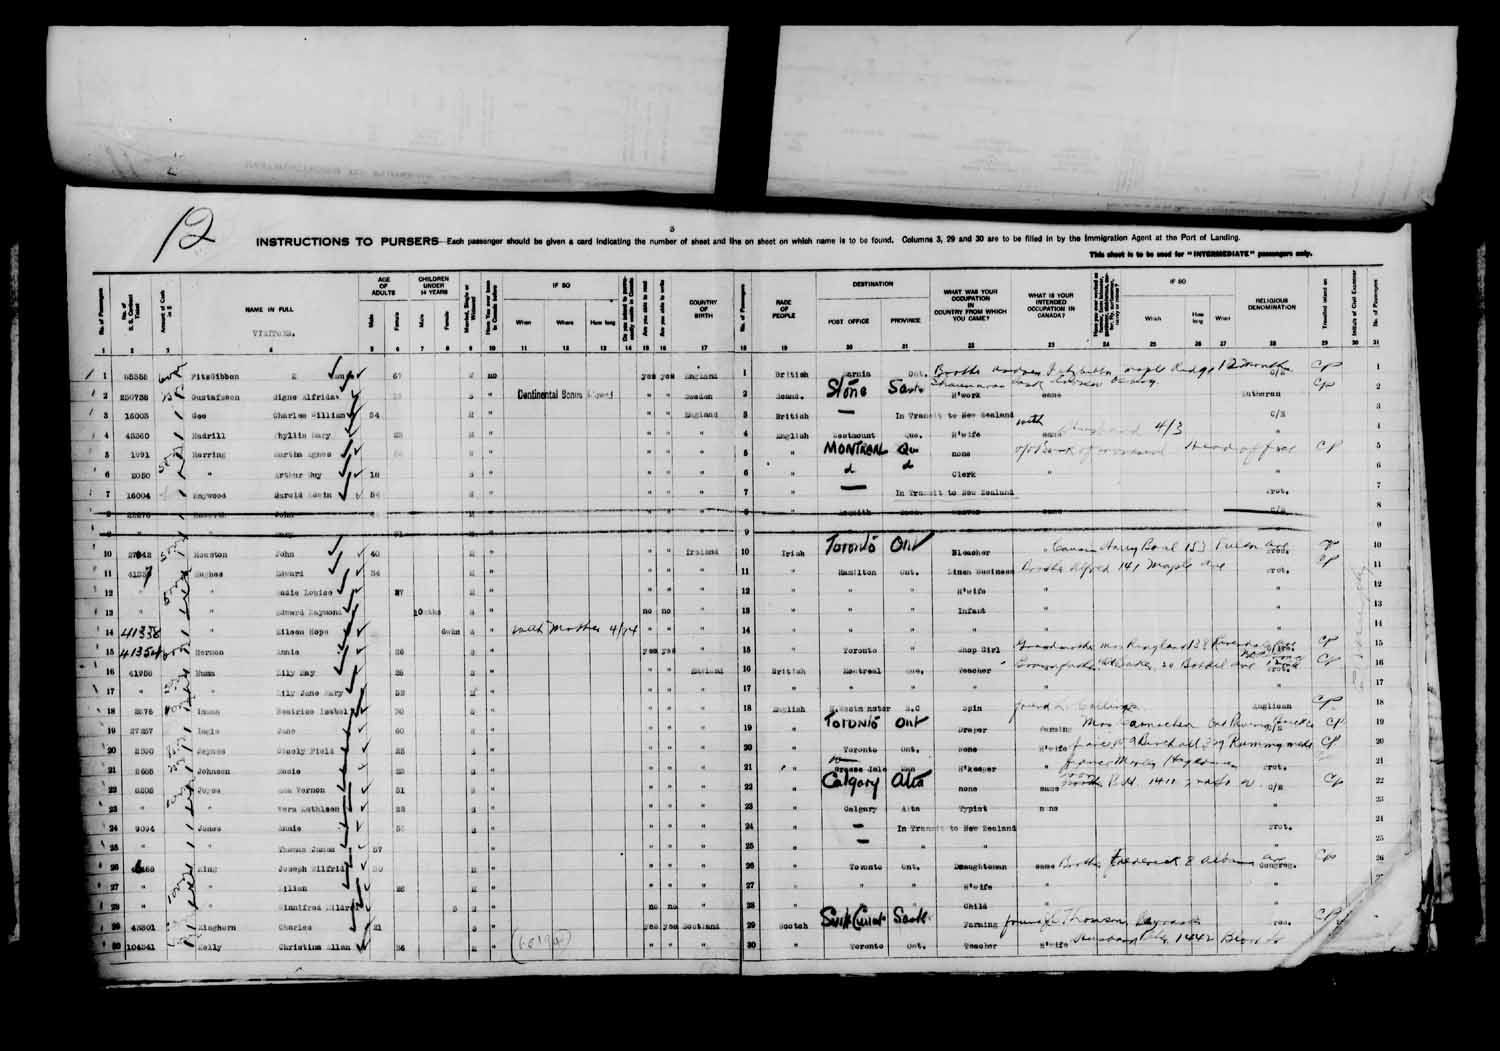 Digitized page of Passenger Lists for Image No.: e003610619